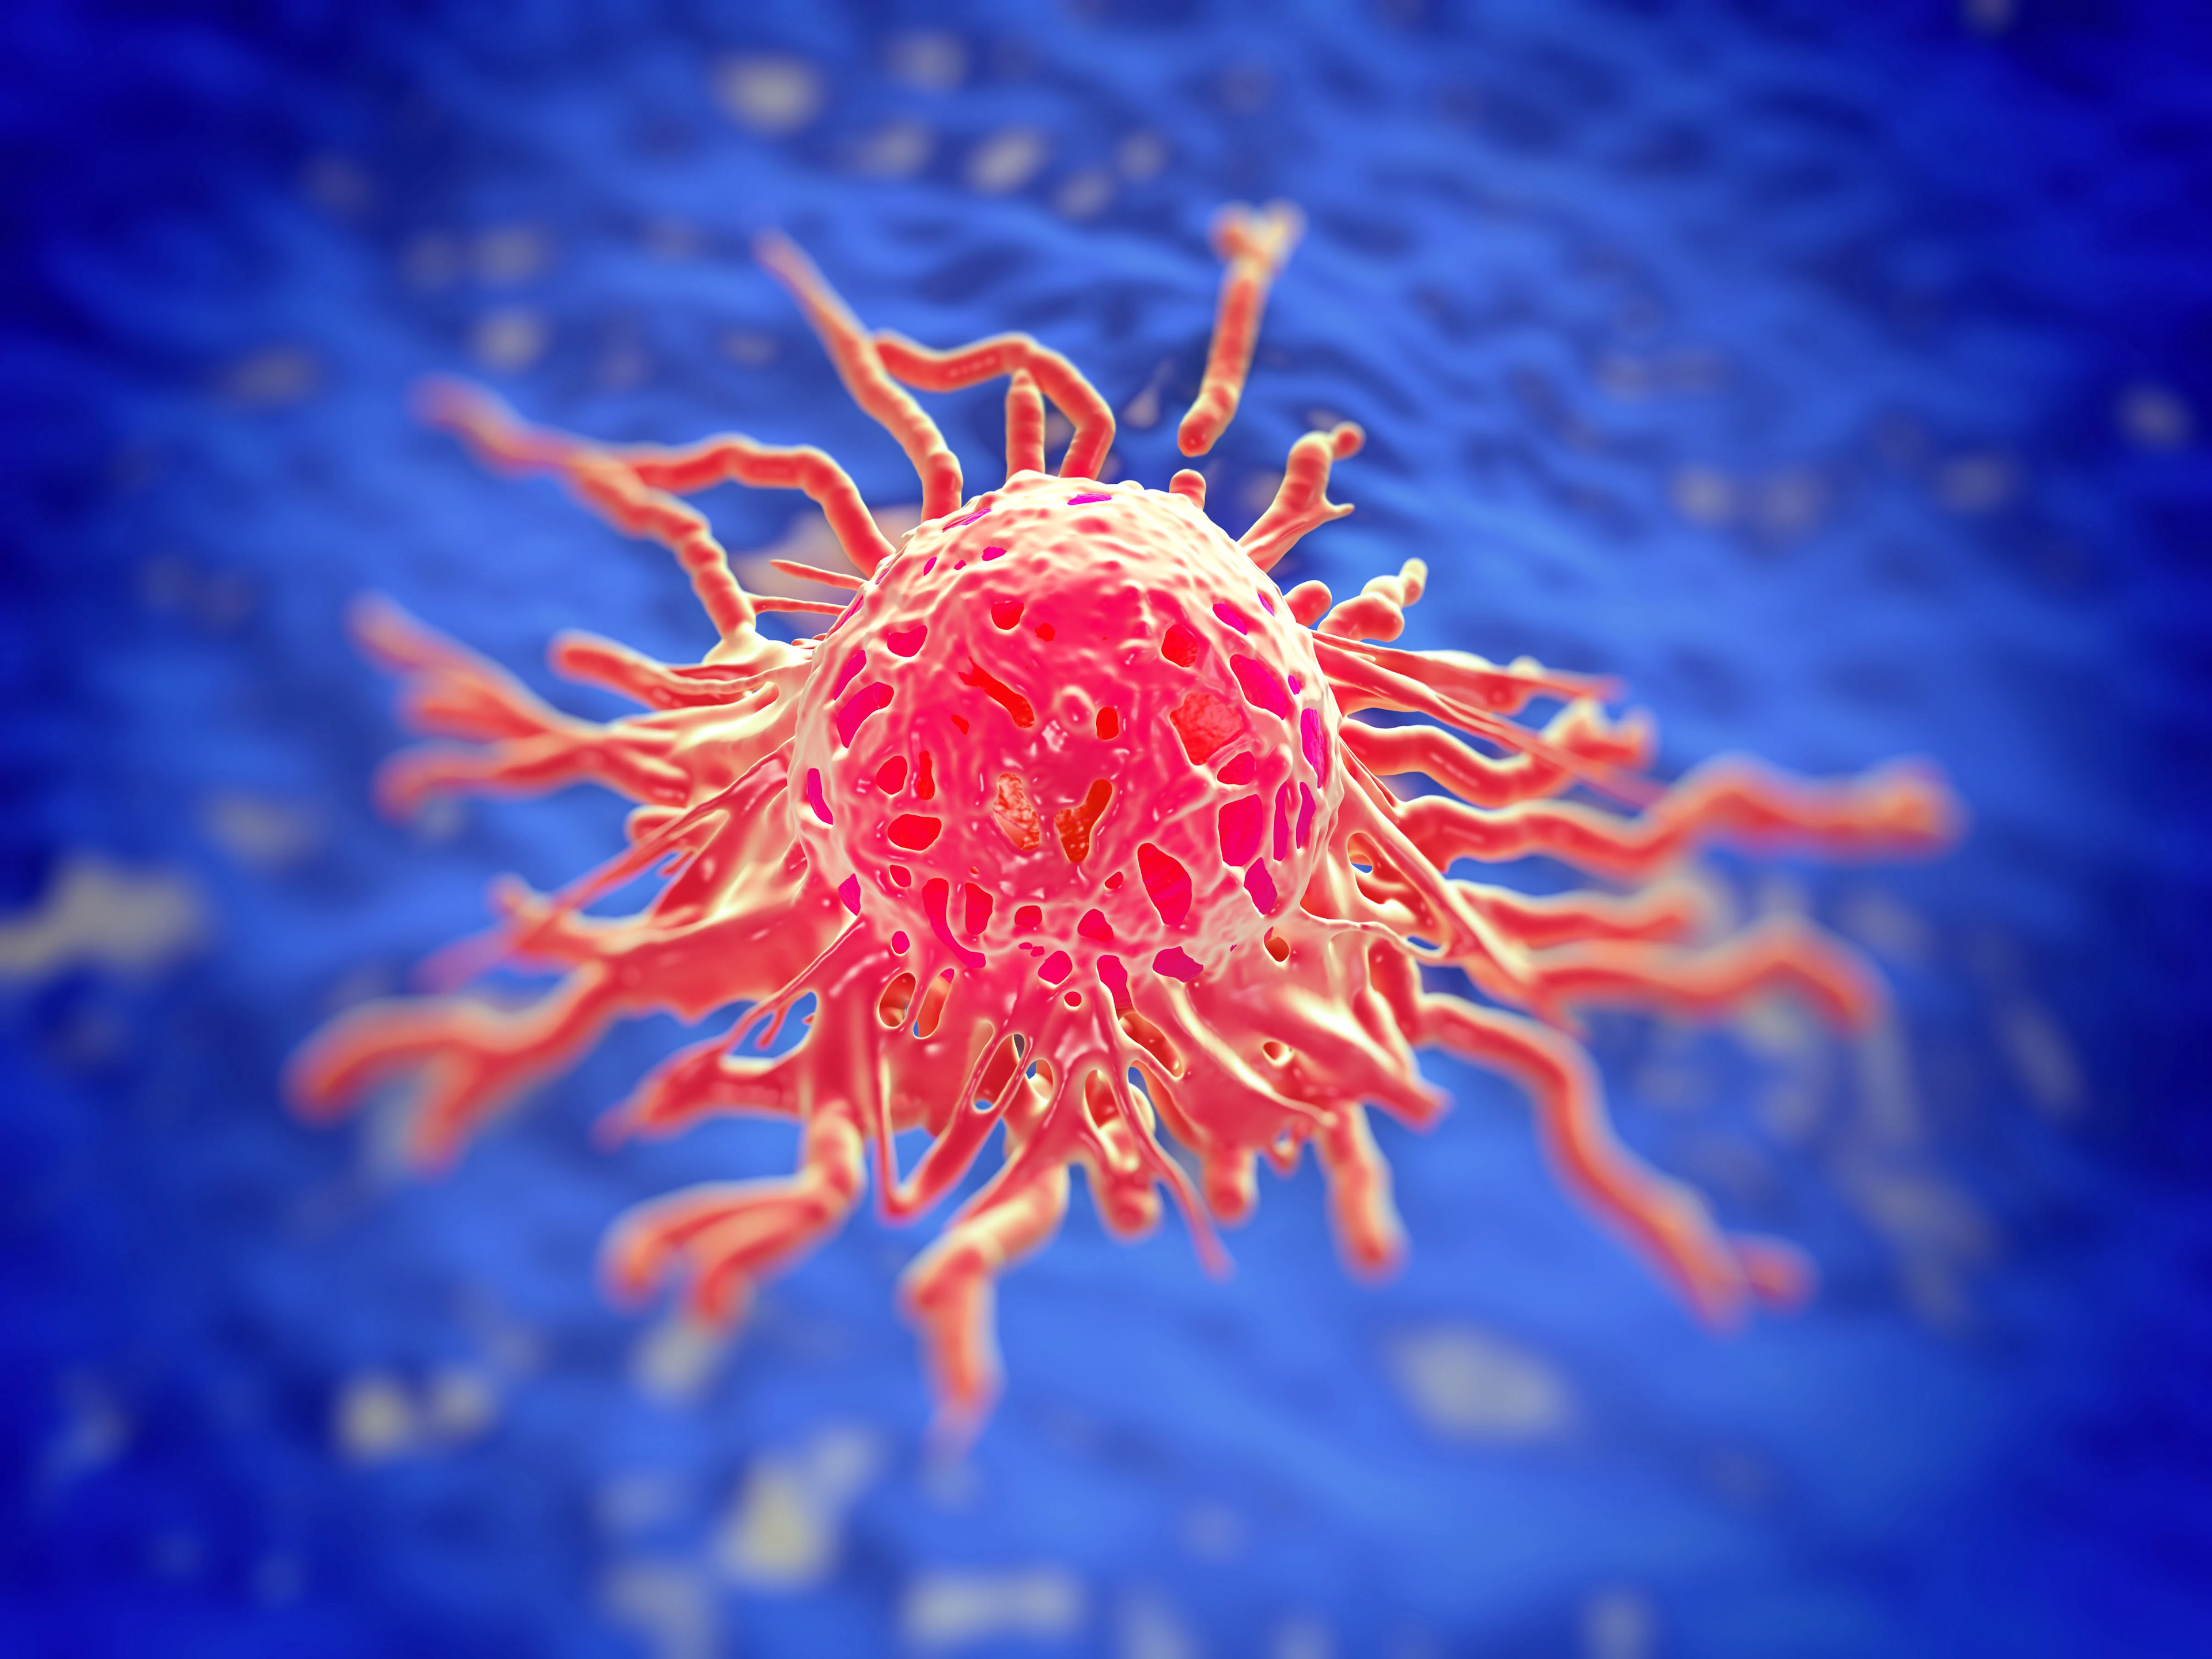 The mTOR inhibitor nab-sirolimus may be the first agent to receive FDA approval as therapy specifically for perivascular epithelioid cell tumors.